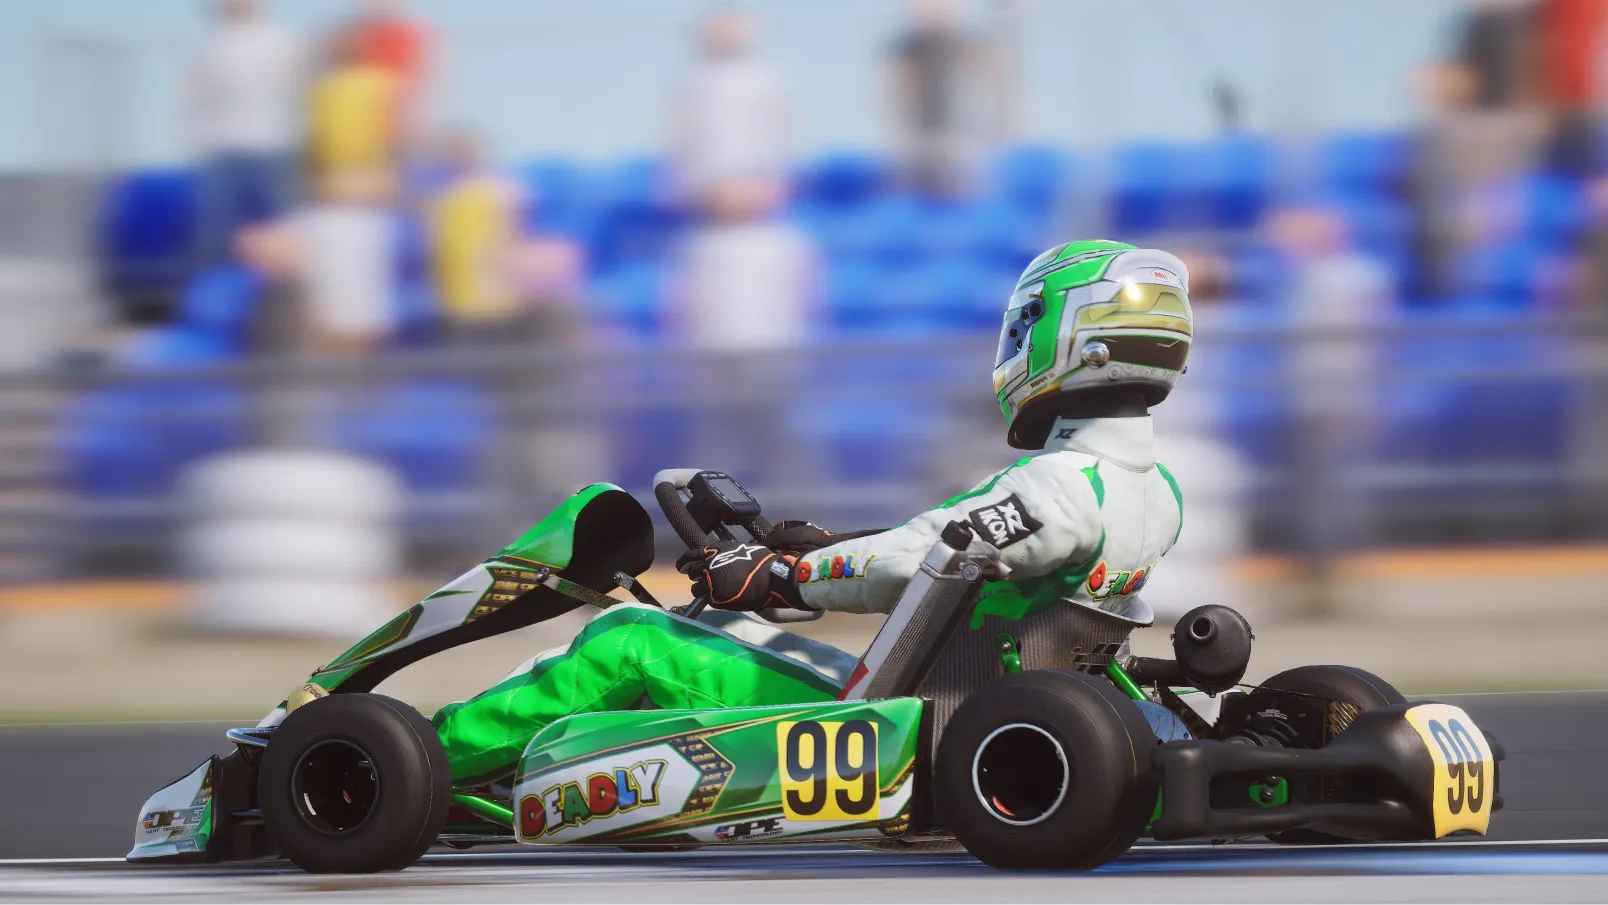 Sofya also worked on a previous project of Motorsport Games - Kartkraft